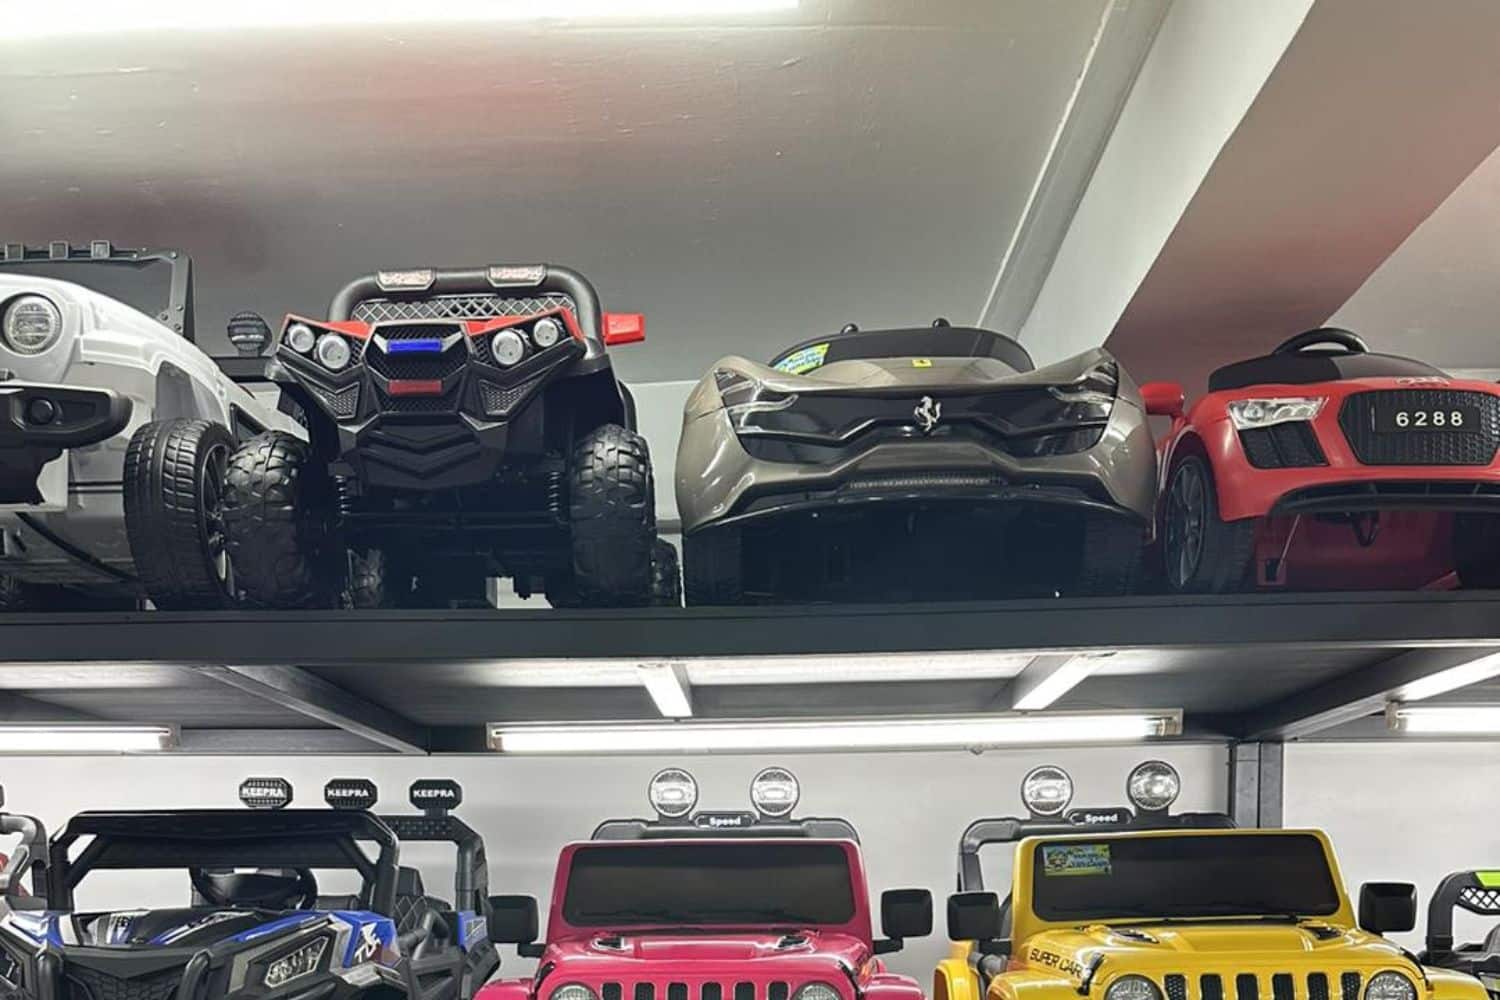 How Long Do Toy Cars Take to Charge?